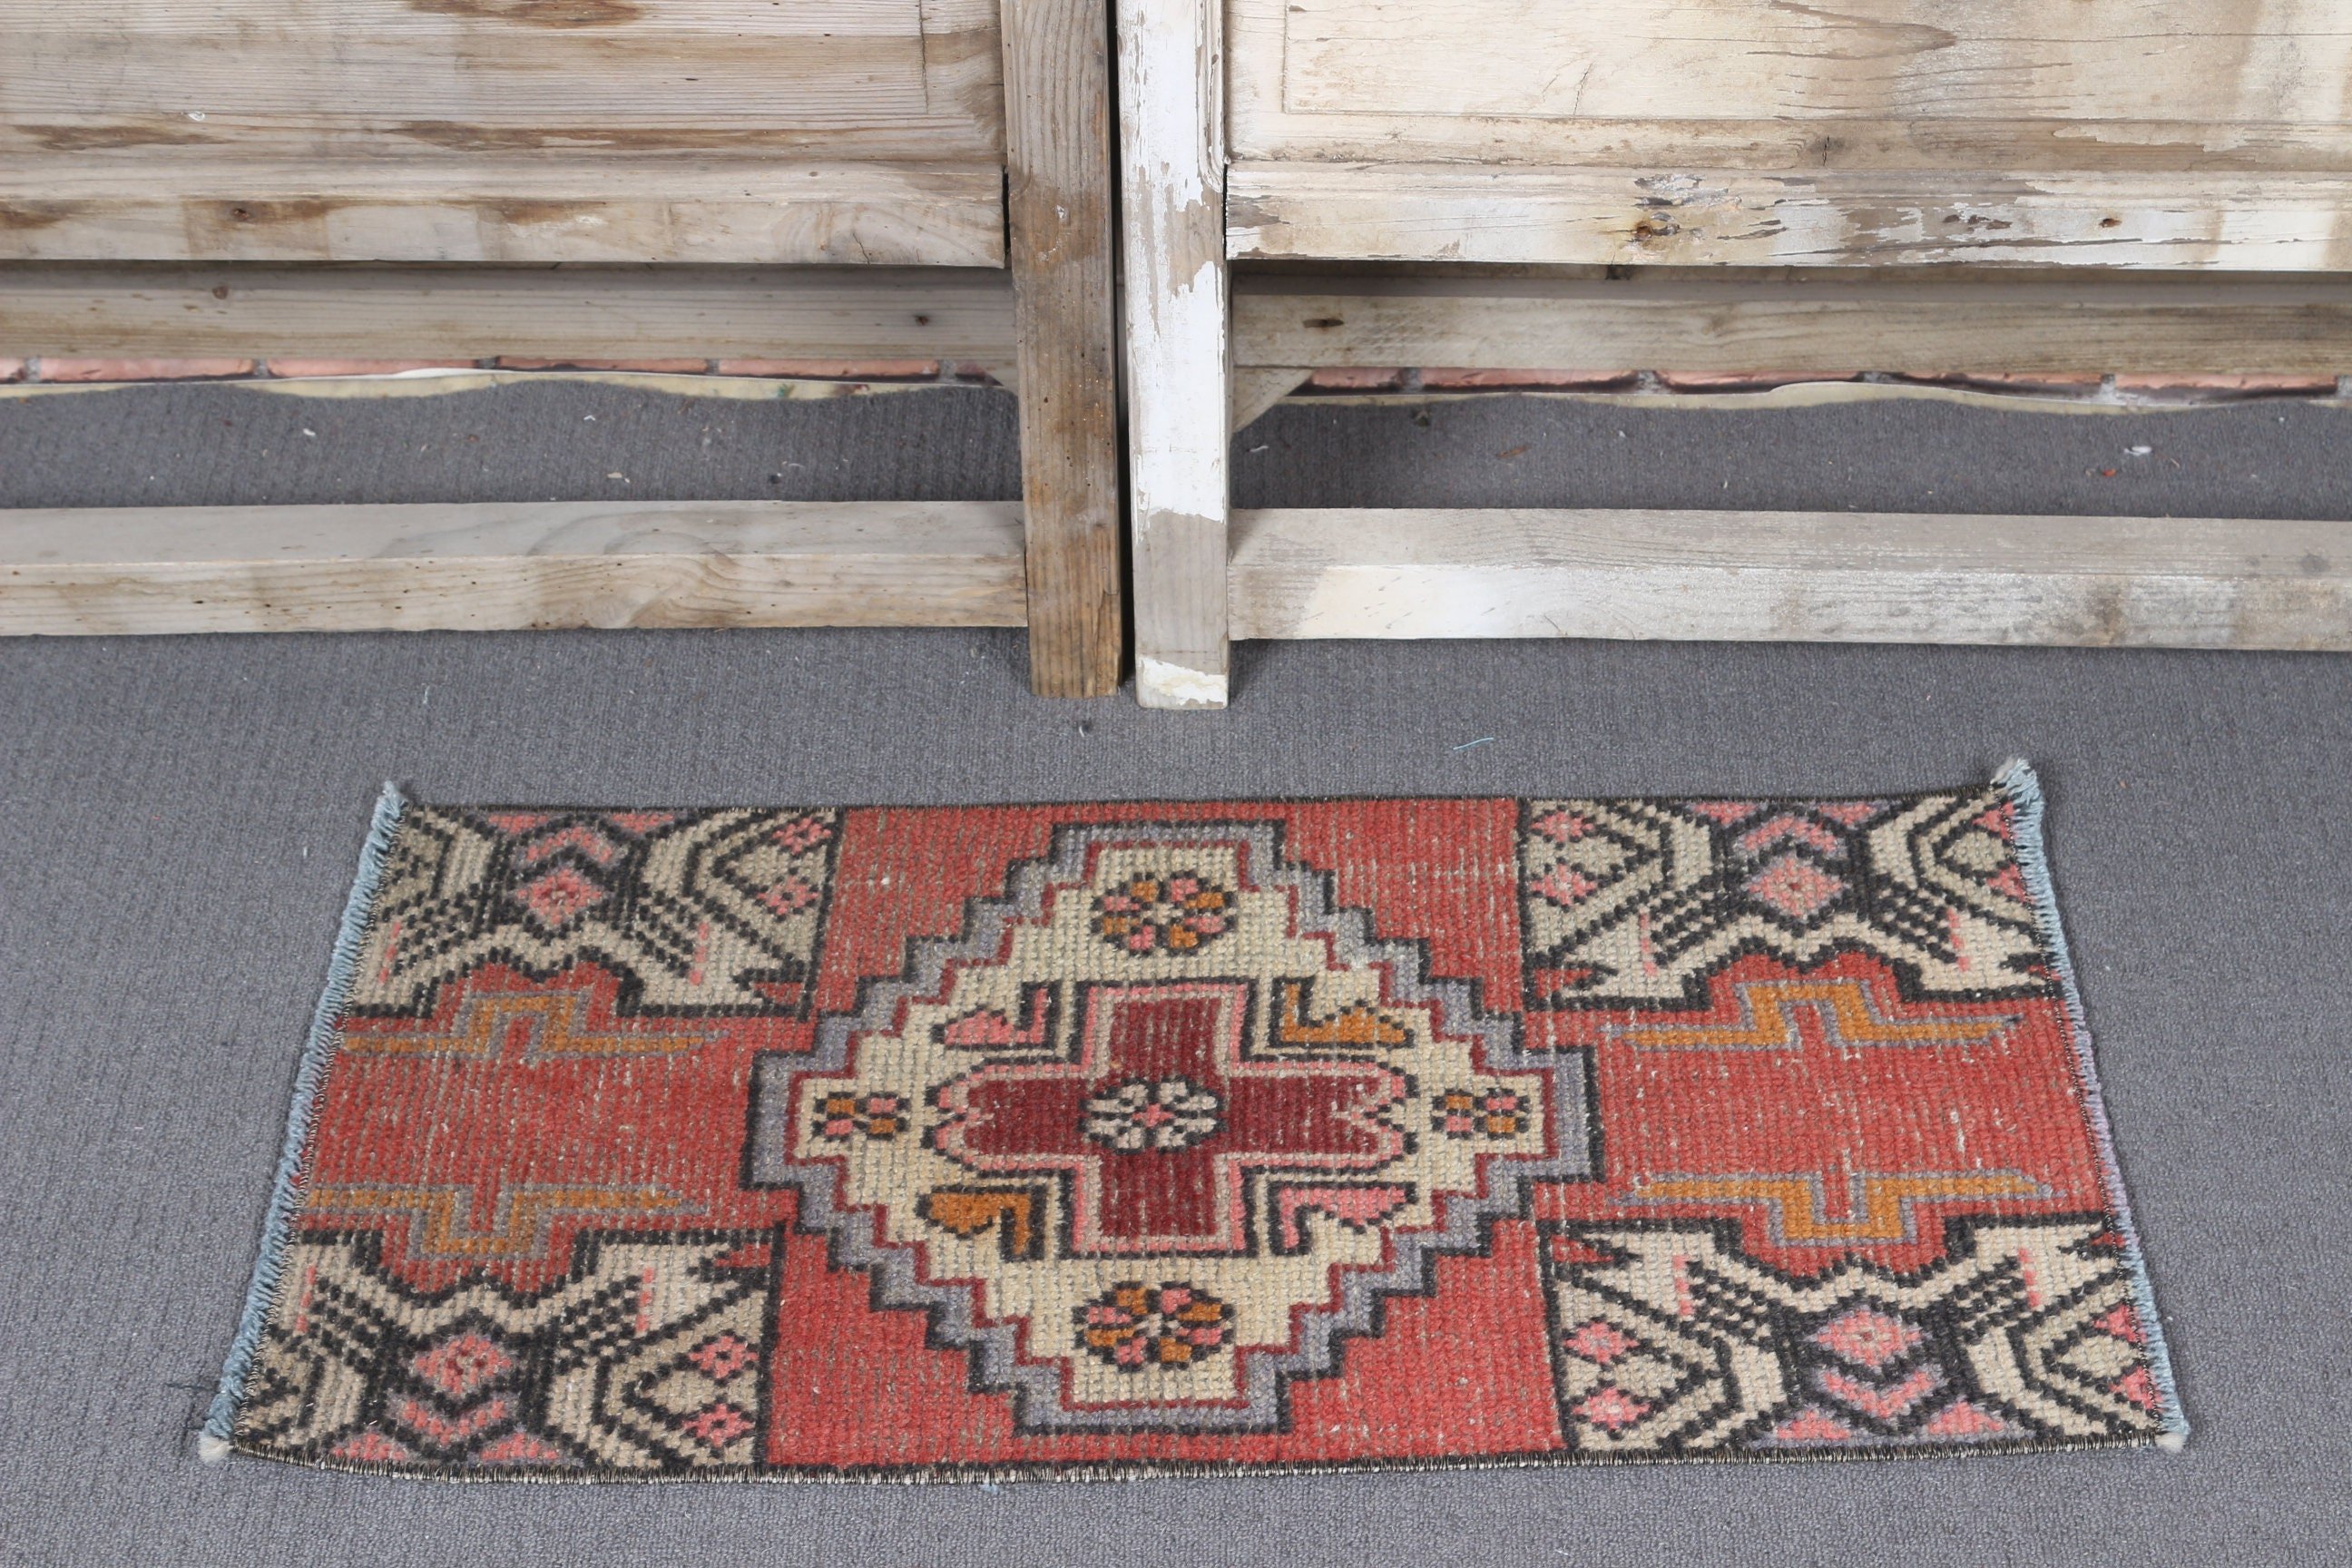 Kitchen Rug, Oushak Rug, Vintage Rugs, Rugs for Entry, Bath Rugs, Ethnic Rug, Nursery Rug, Turkish Rug, Red Cool Rug, 1.3x2.5 ft Small Rugs